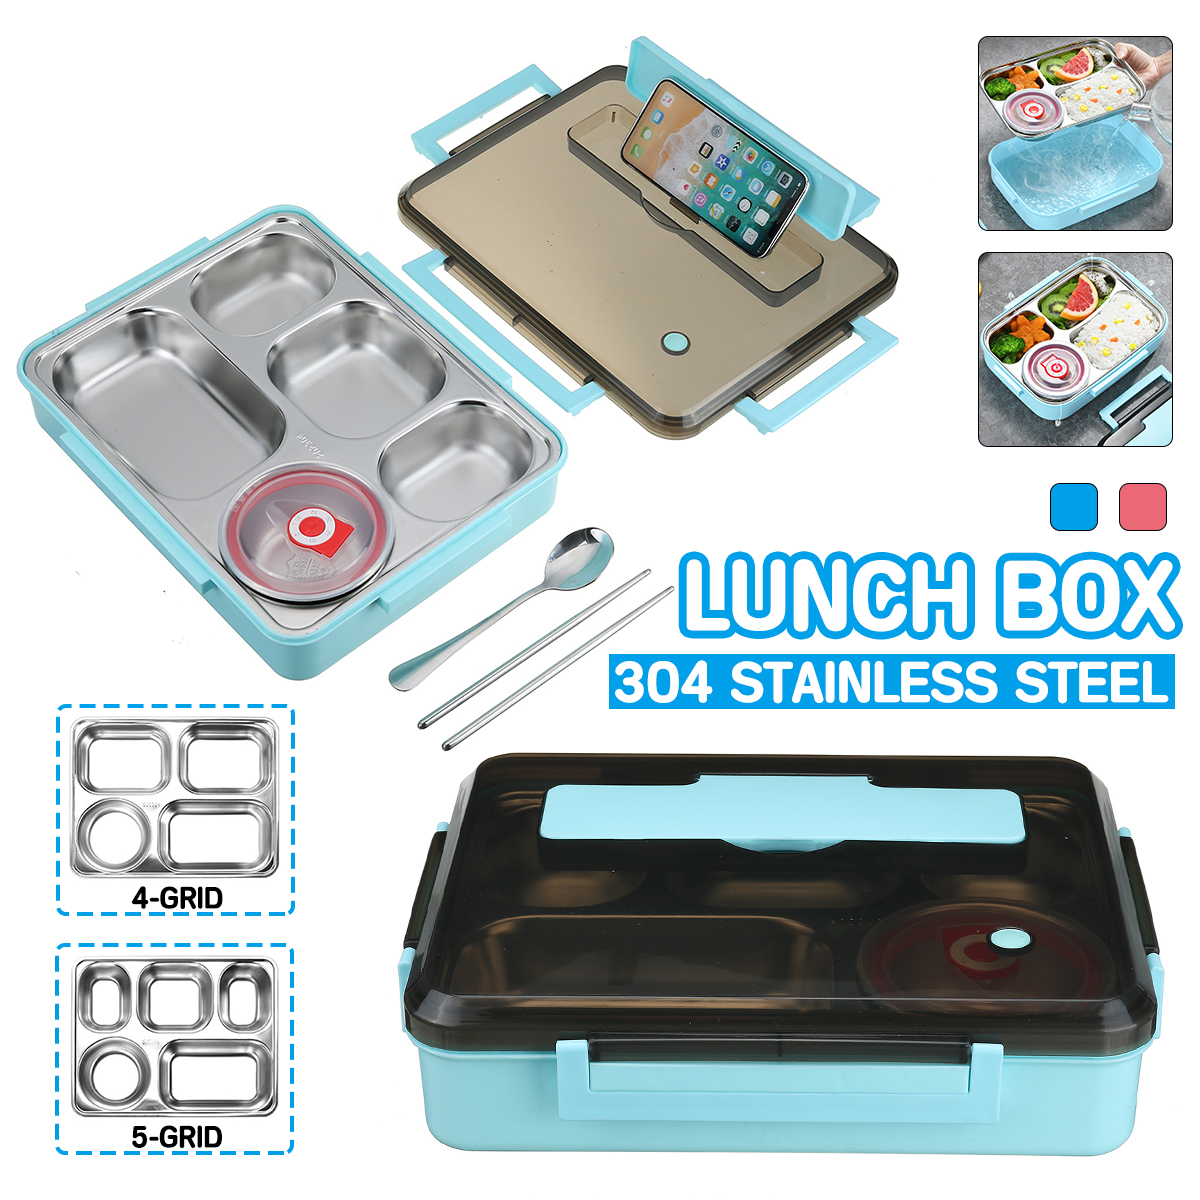 304-Stainless-Steel-Lunch-Box-45-Grid-Leakproof-Food-Container-Outdoor-Camping-Picnic-Kitchen-1787462-1